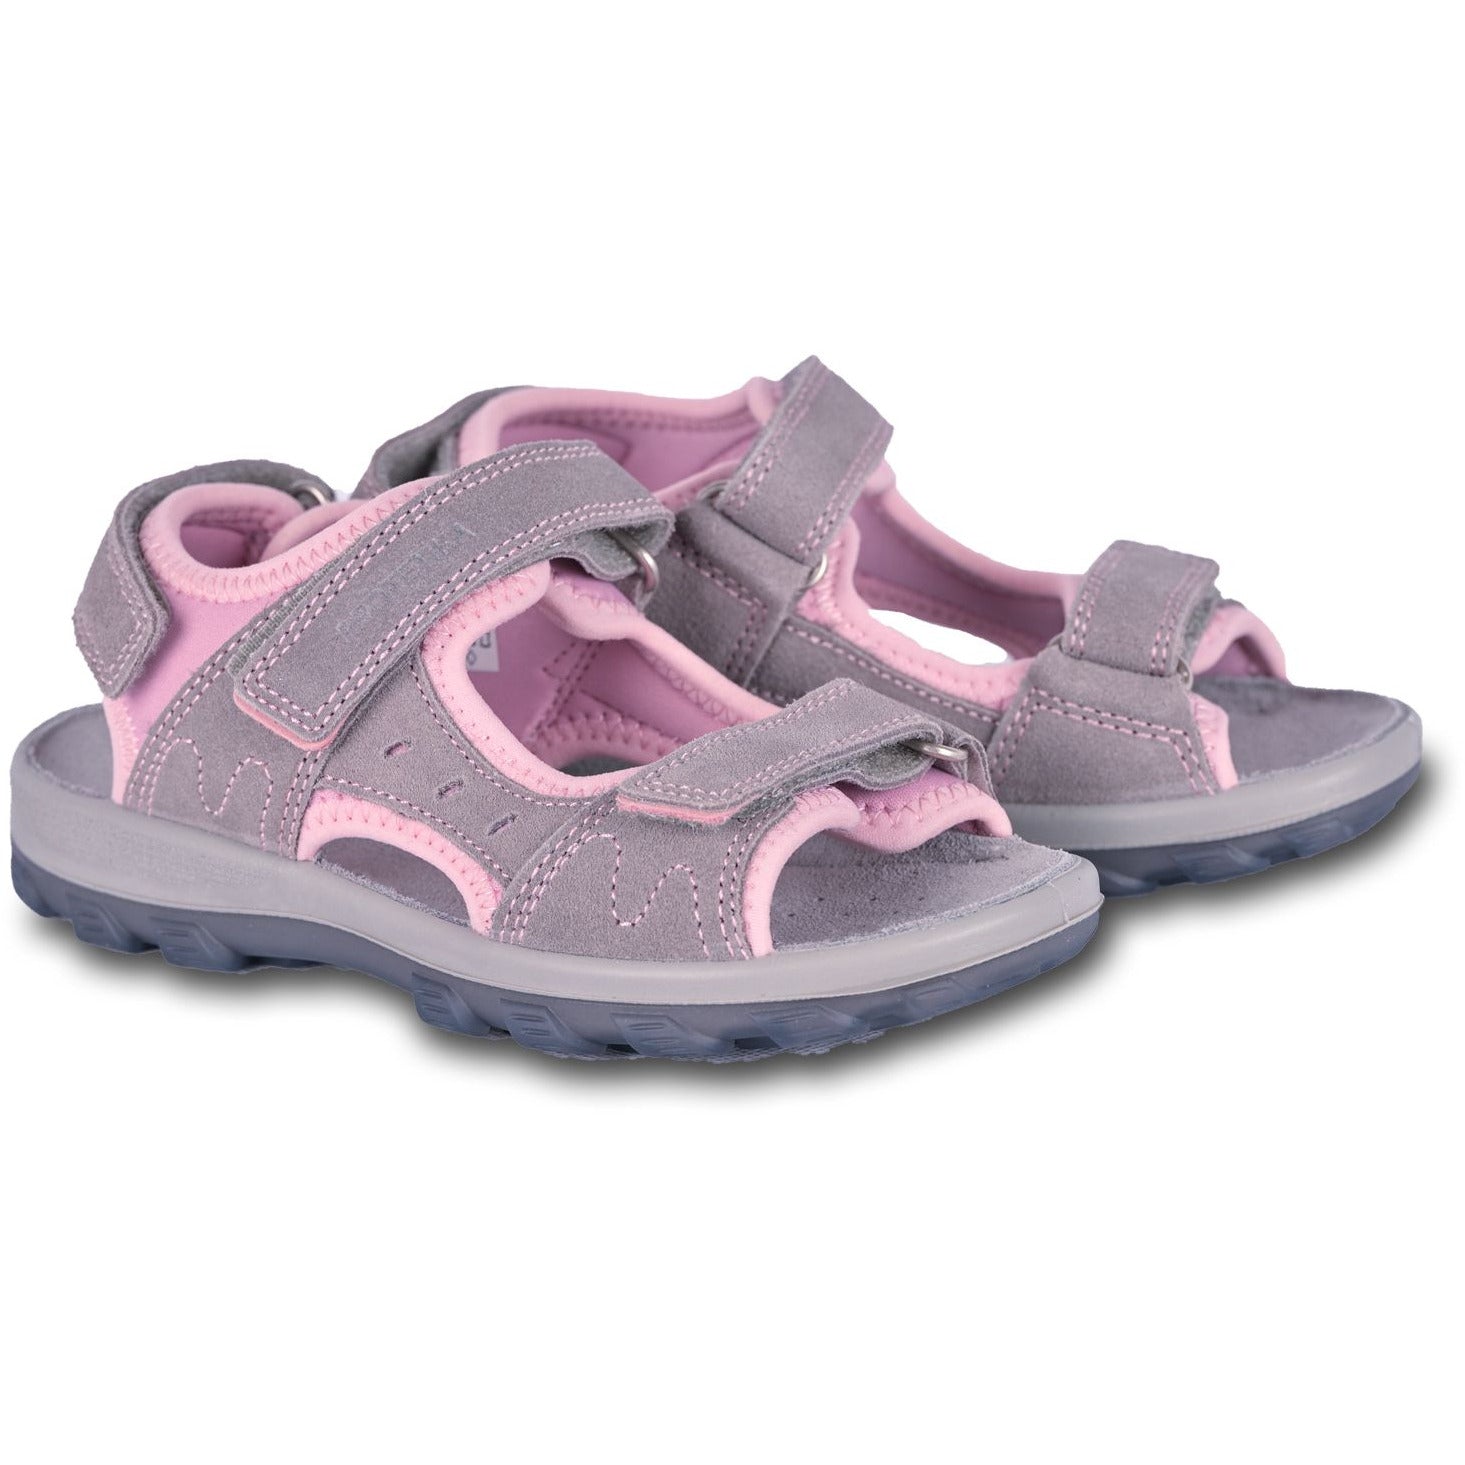 Stylish looking ergonomically shaped suede leather sandals for older girls.